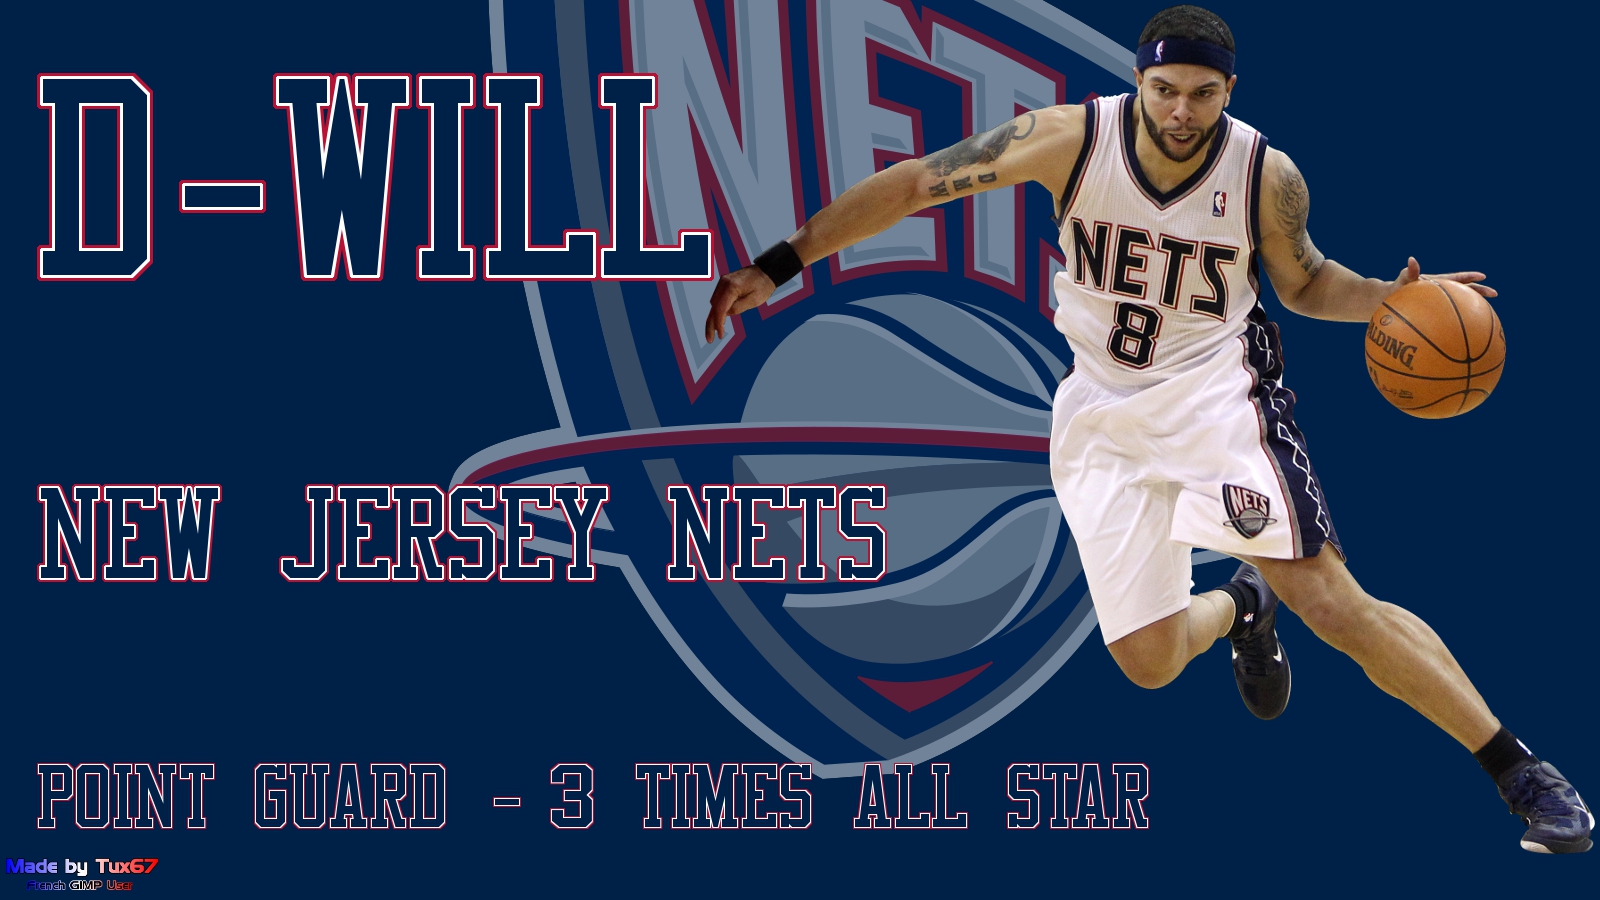 cool deron williams wallpapers